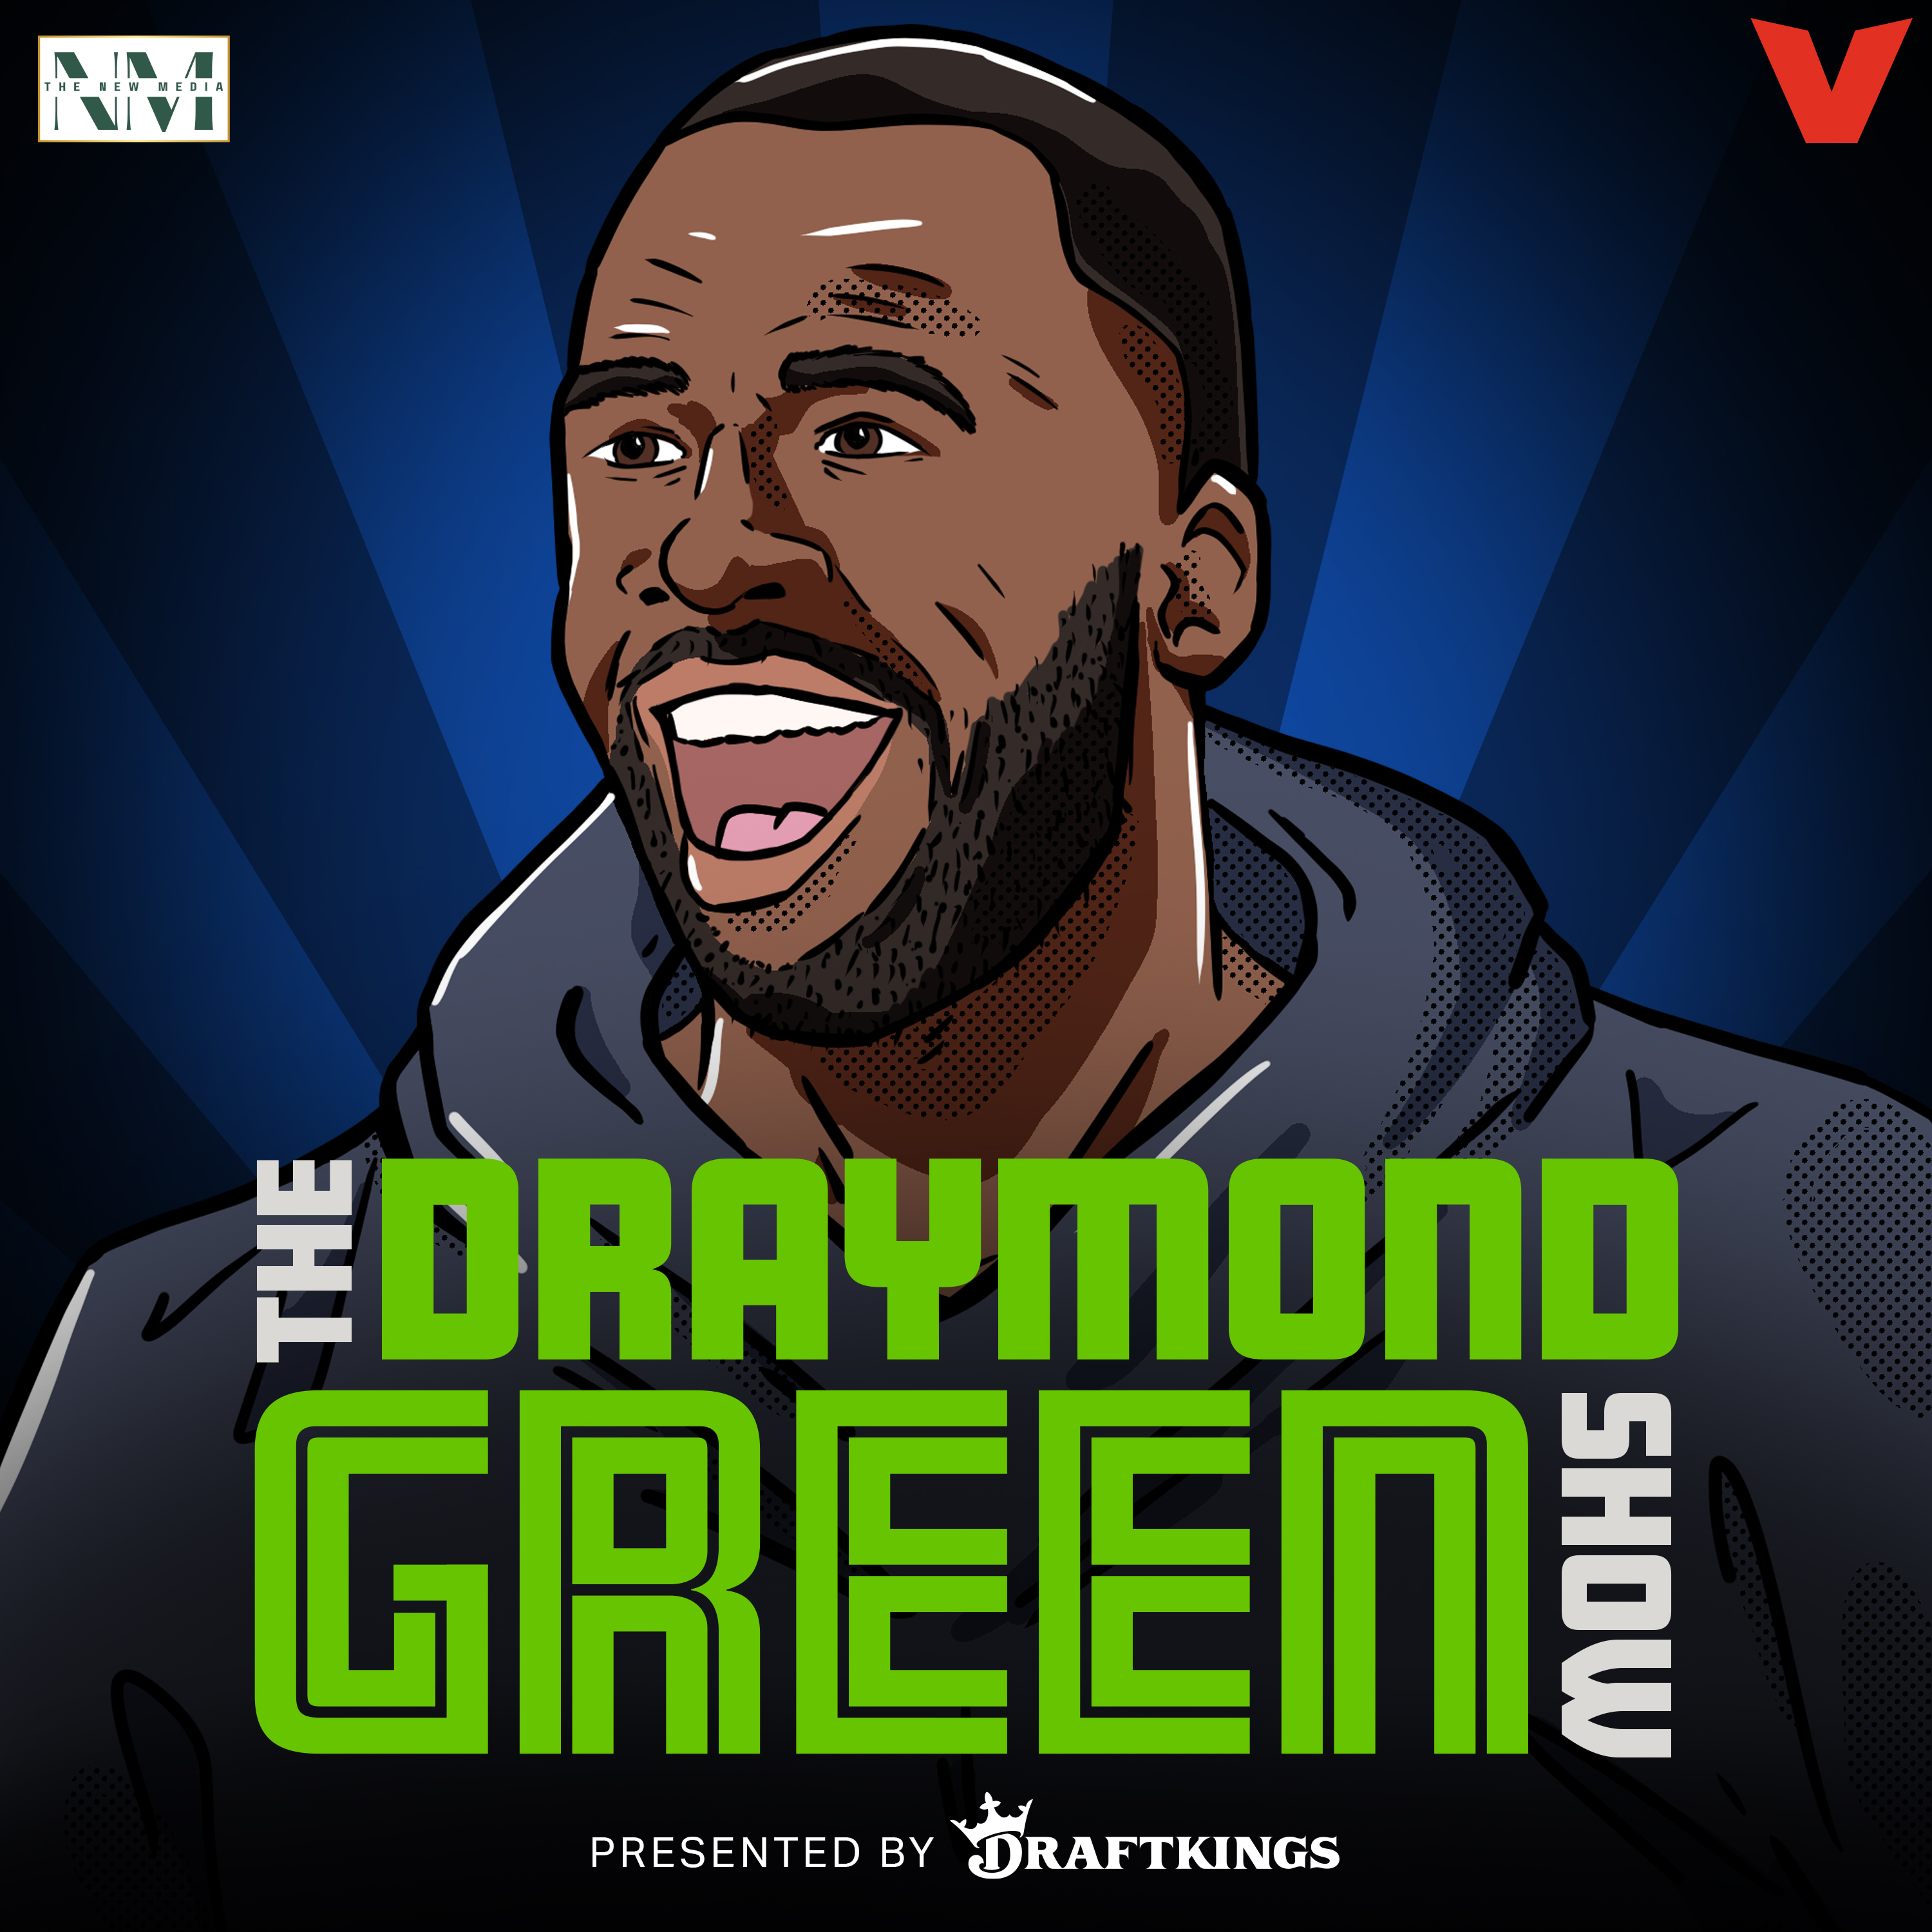 Draymond Green Show - Warriors Beat Lakers + Problems With College Basketball Discourse